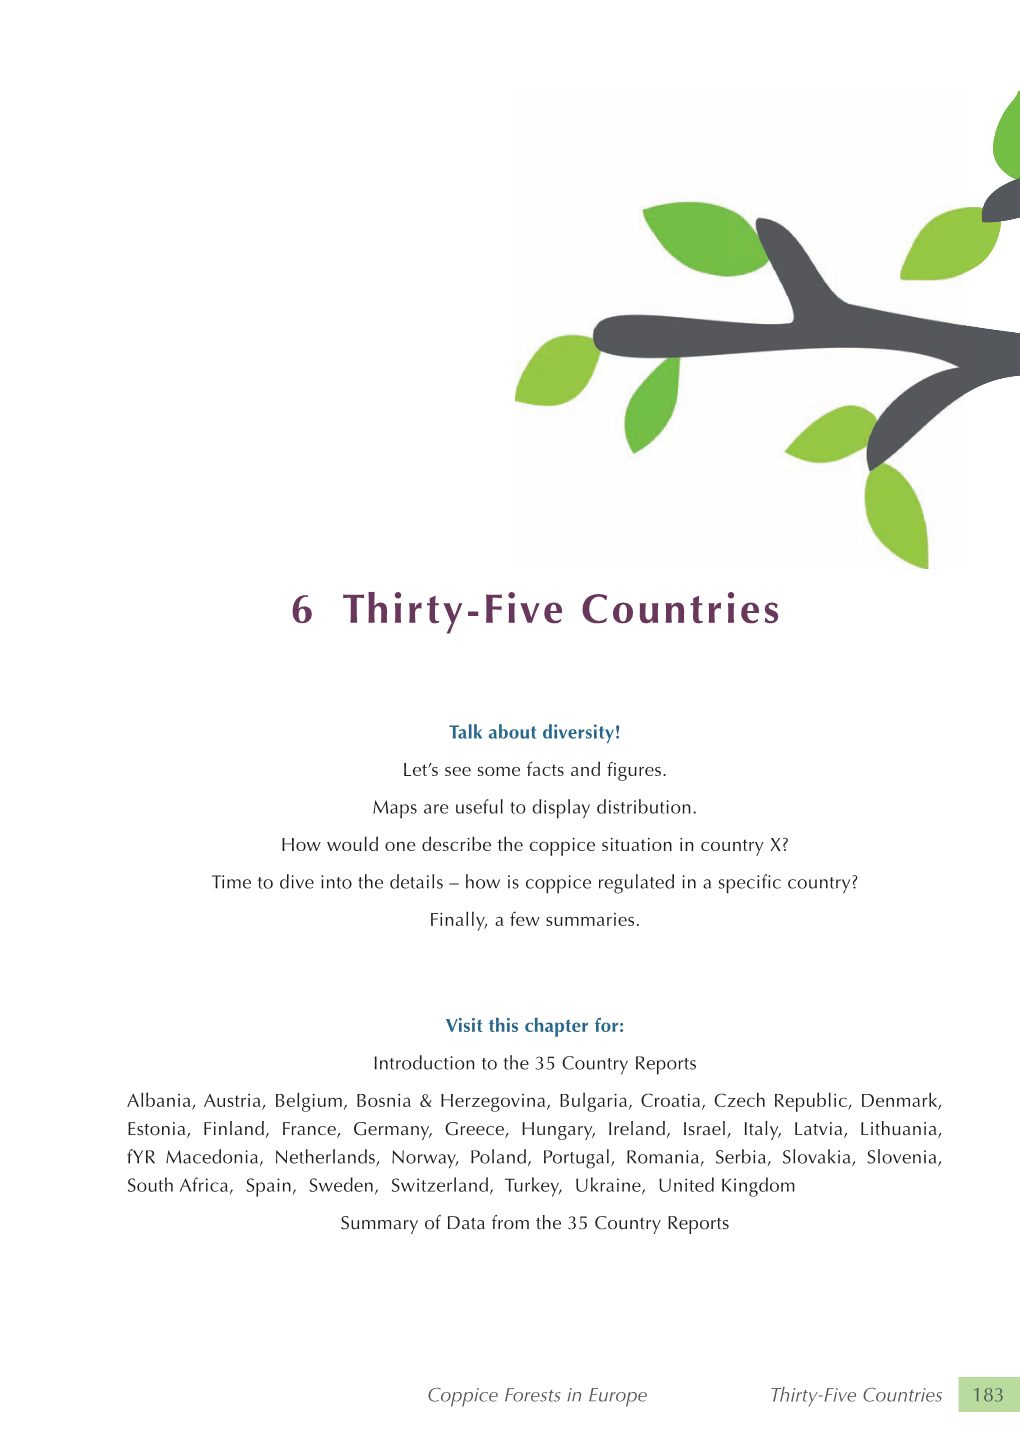 6 Thirty-Five Countries